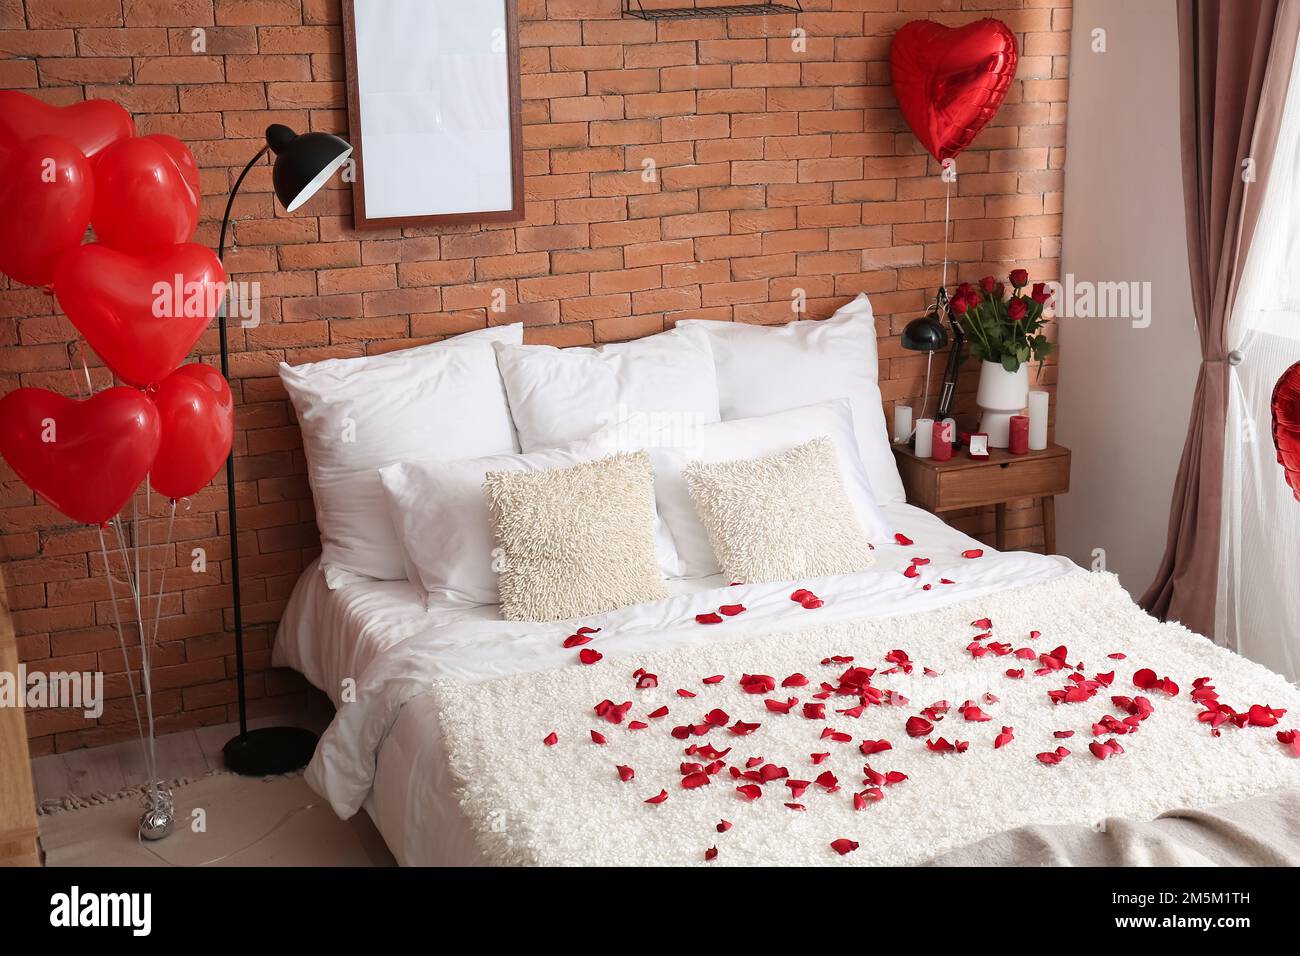 Interior of bedroom decorated for Valentine\'s Day with roses ...